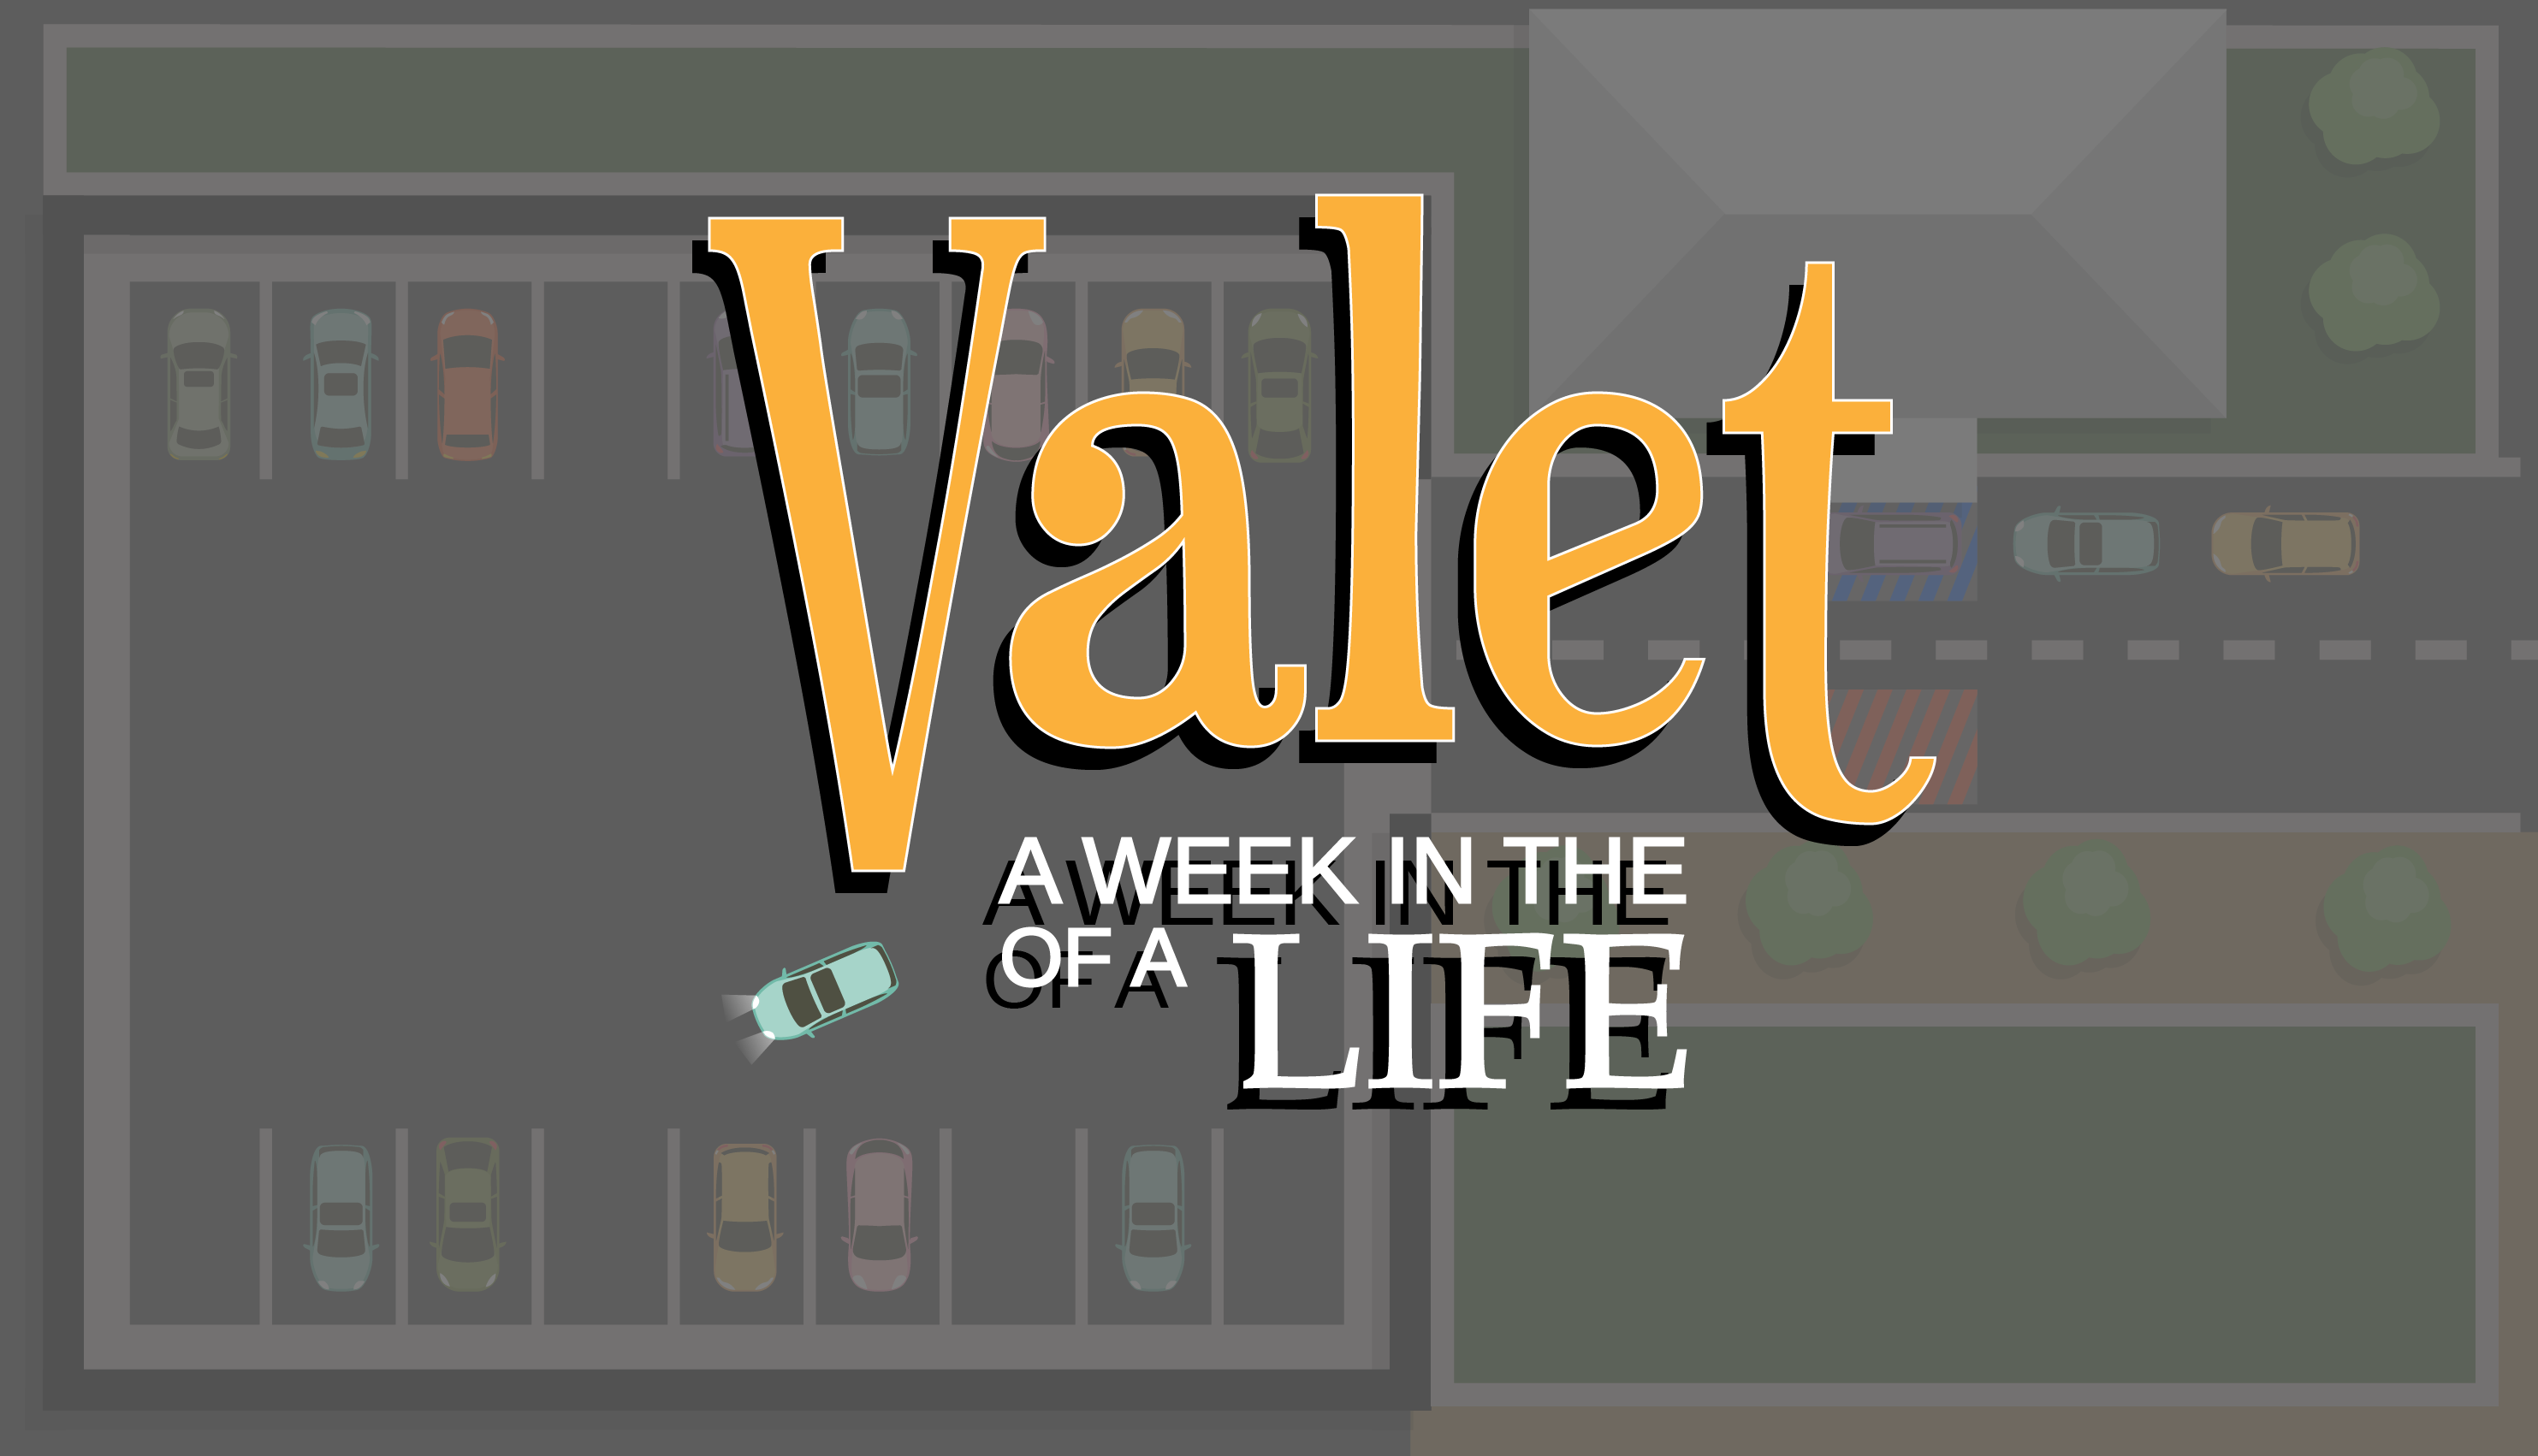 A WEEK IN THE LIFE OF A VALET